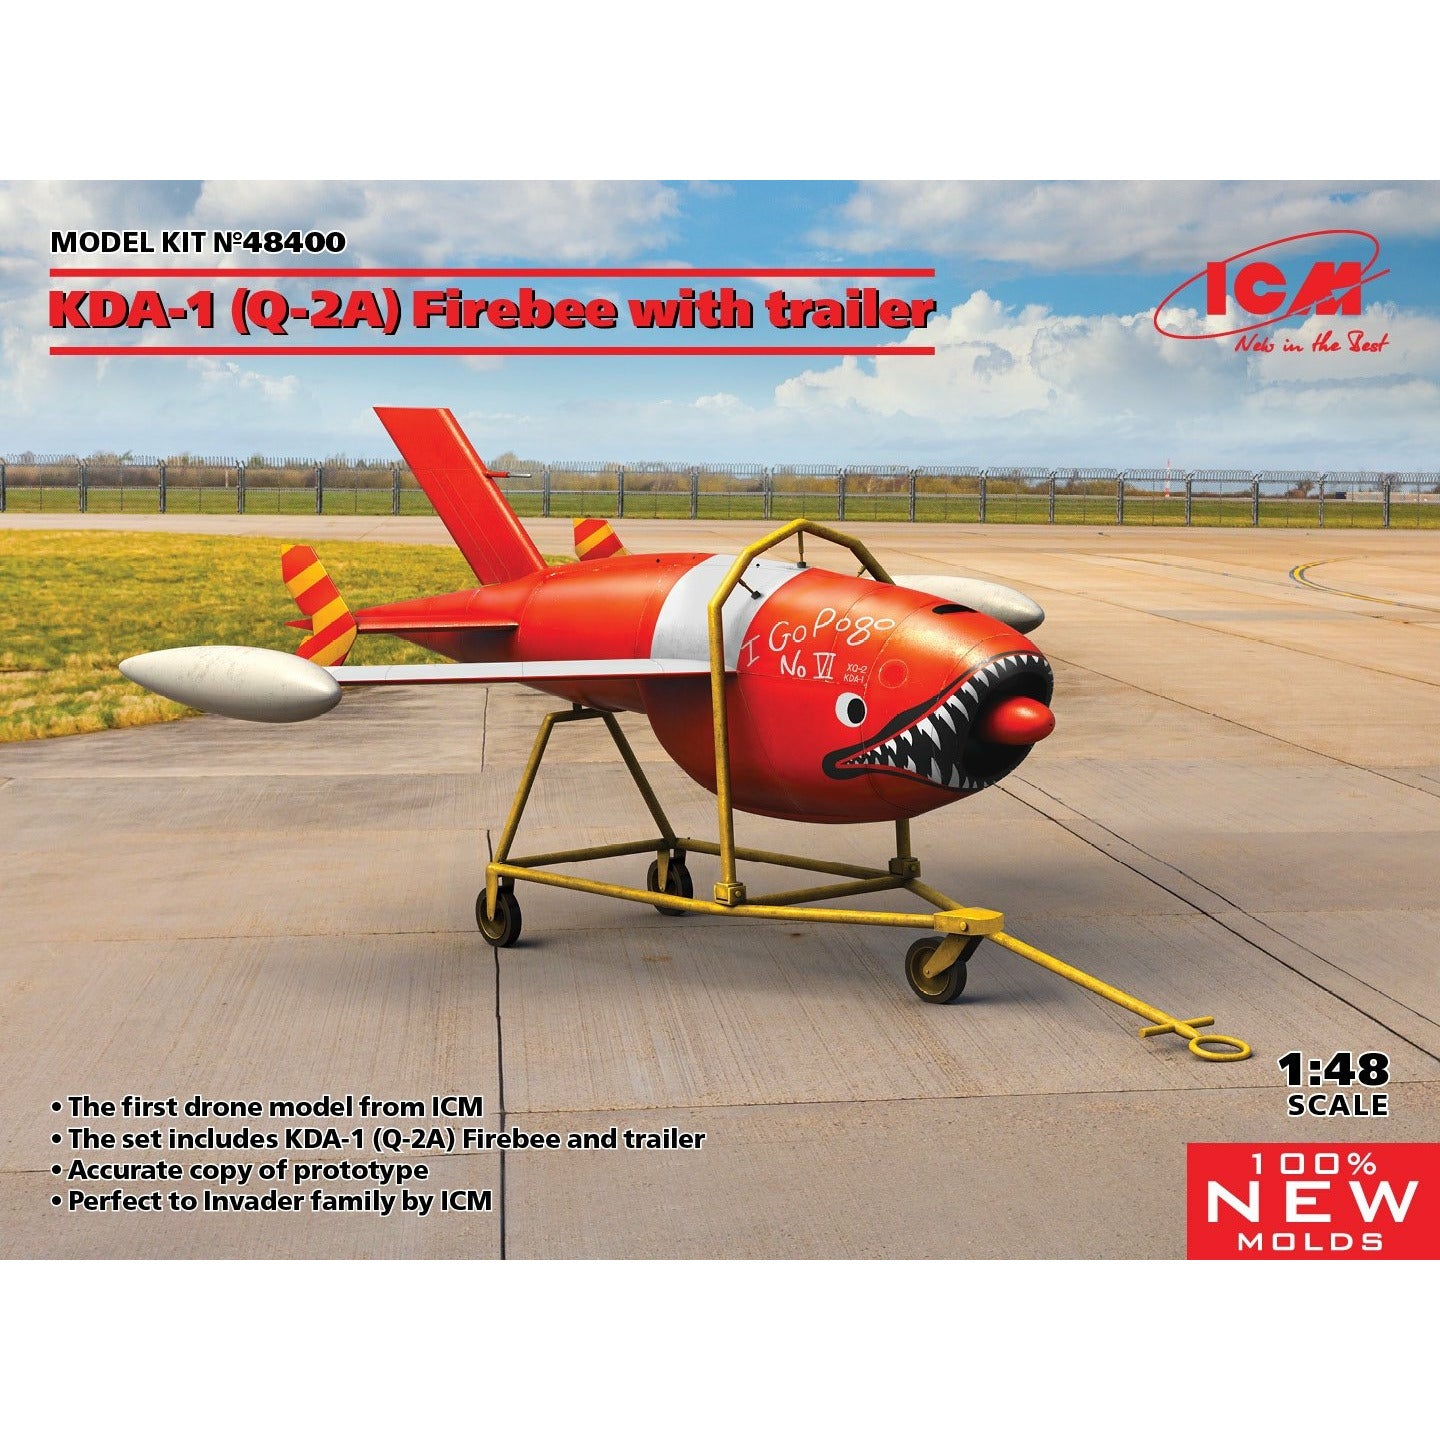 Q-2A (KDA-1) Firebee with trailer (1 airplane and trailer) 1/48 #48400 by ICM